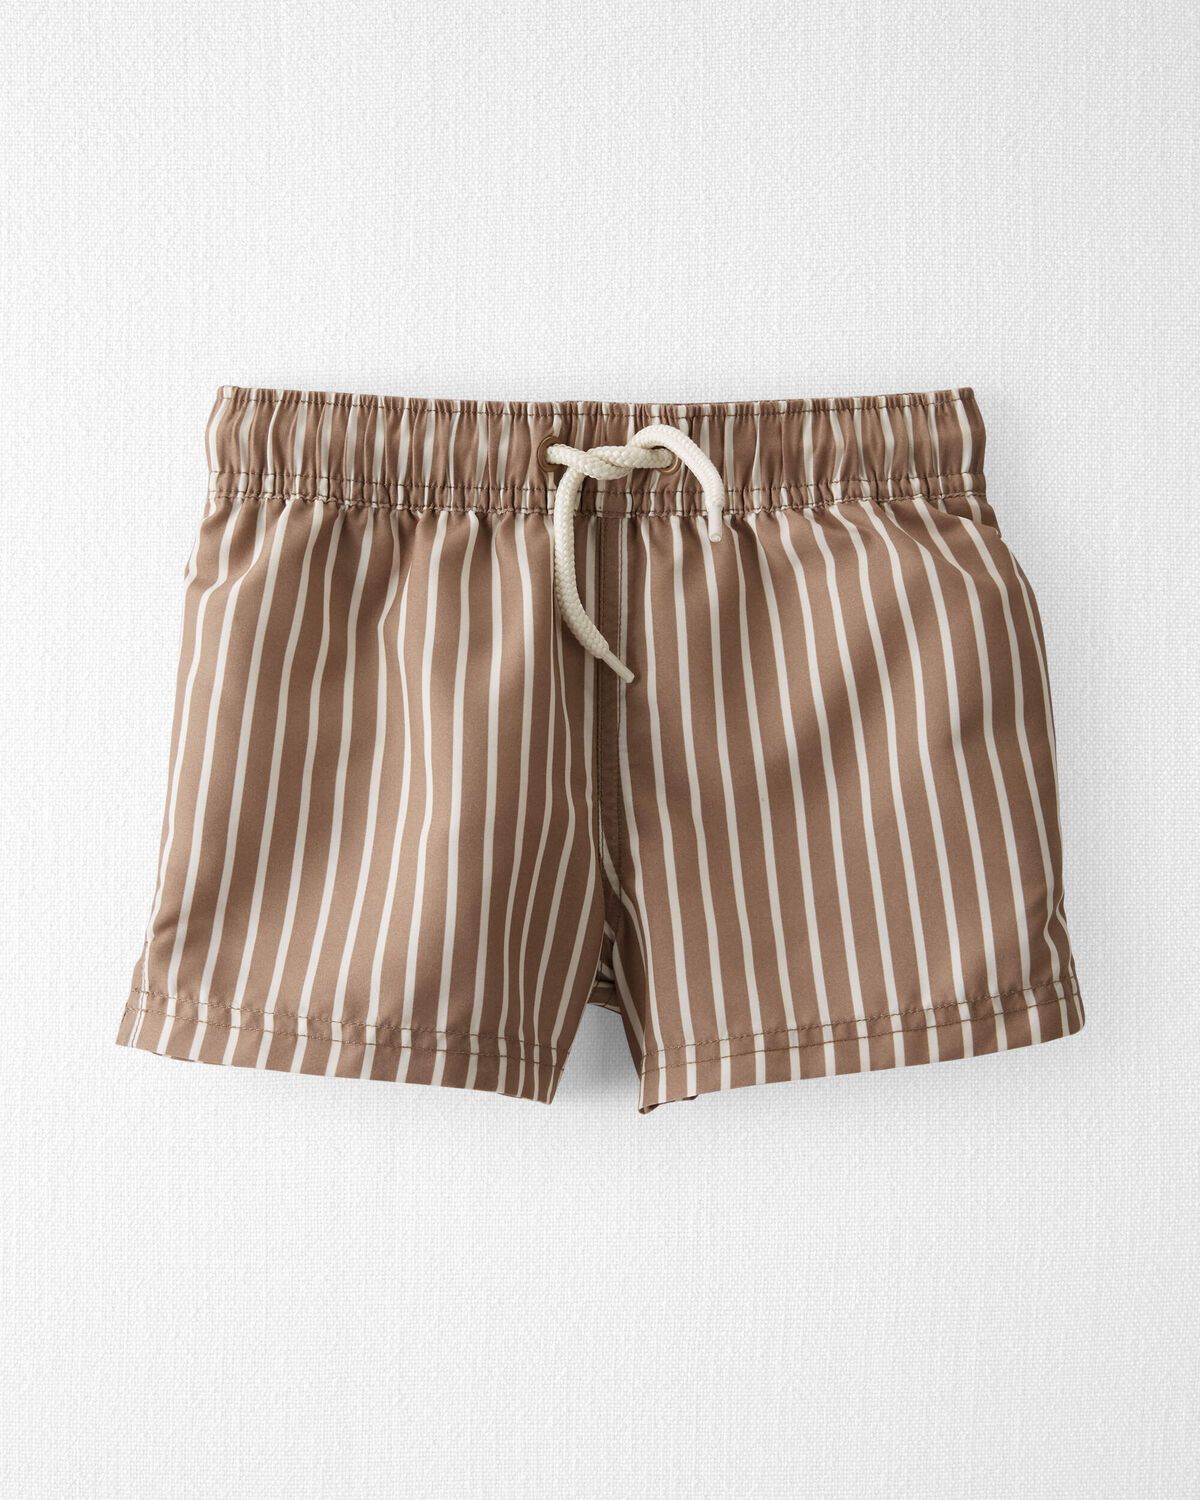 Seagull Print Toddler Recycled Swim Trunks | carters.com | Carter's